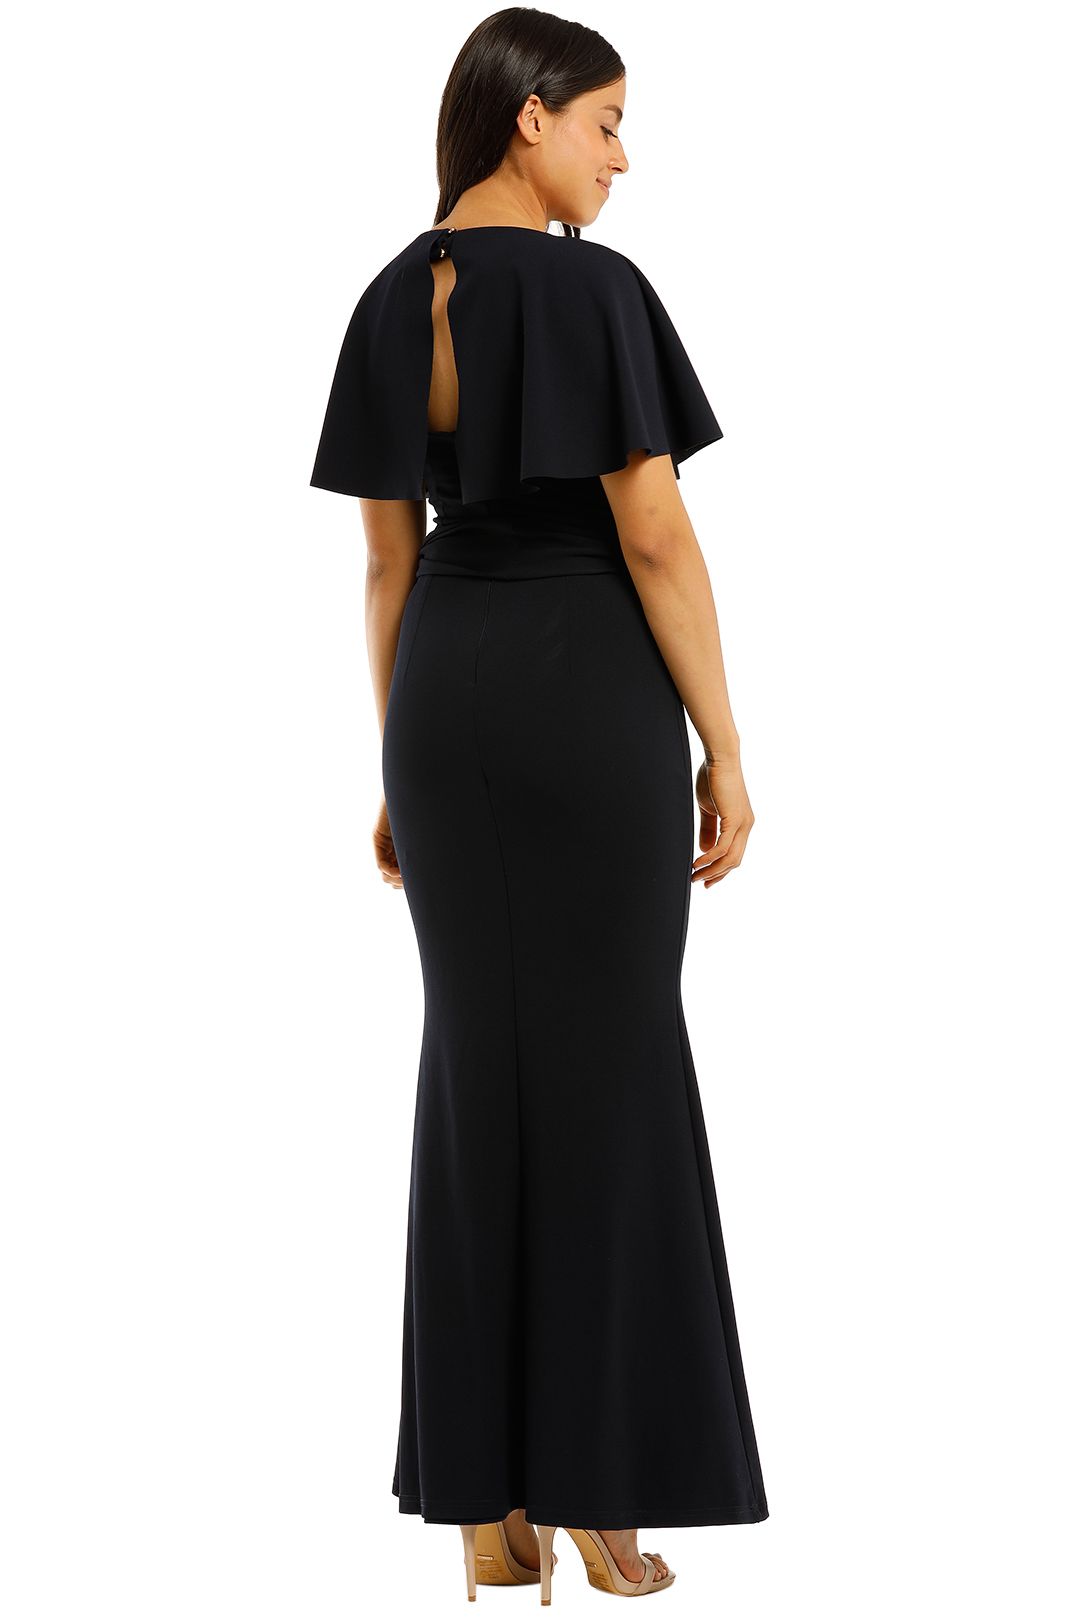 Pasduchas-Mrs-Carter-Gown-Navy-Back